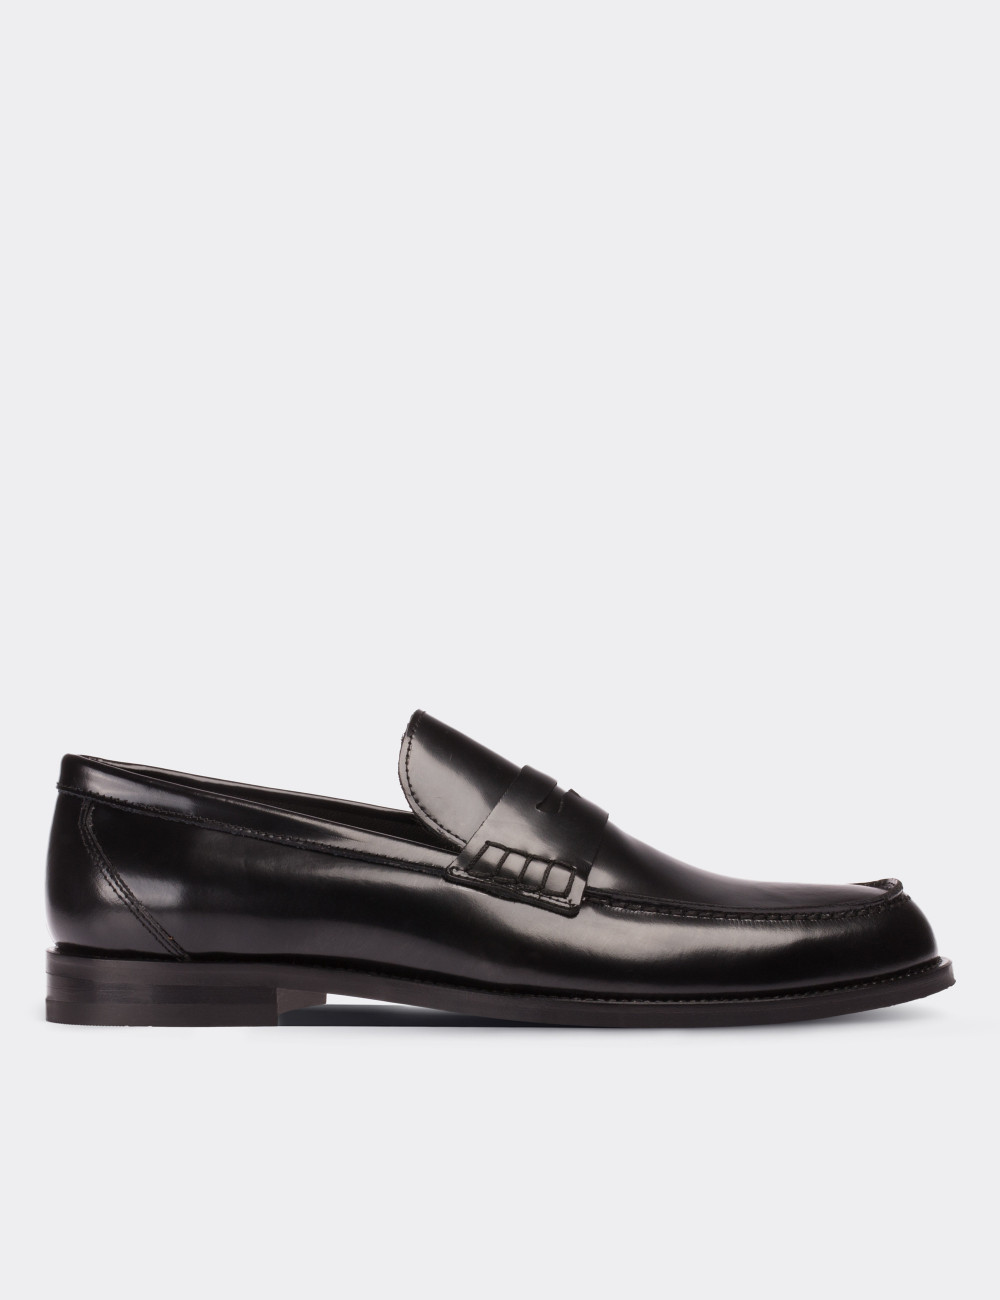 Black Leather Loafers - Deery